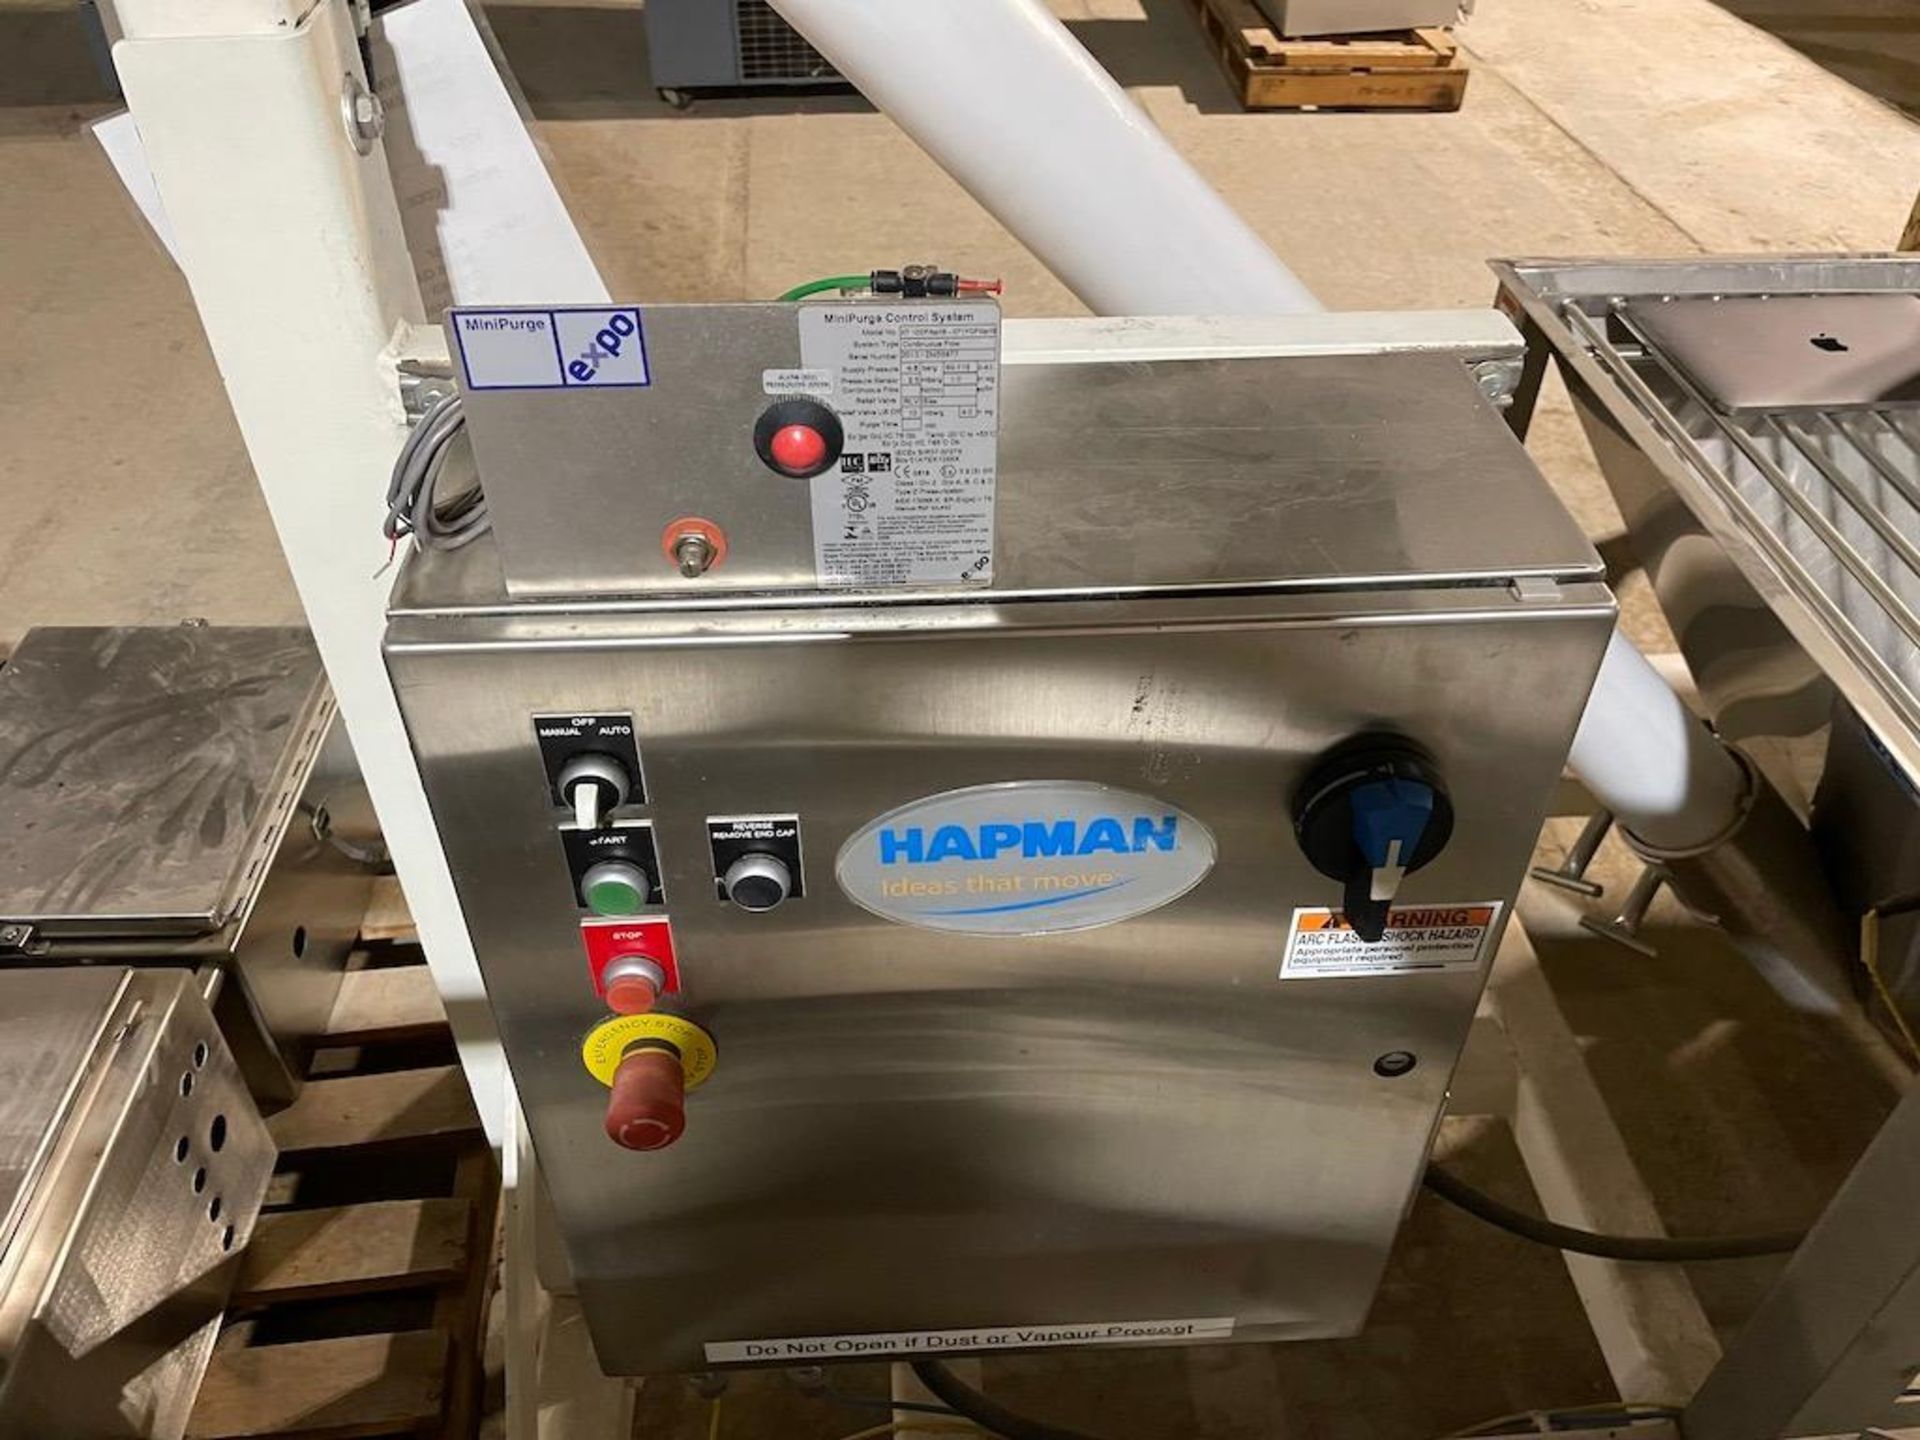 2014 HAPMAN XP RATED BIOMASS DRY MATERIAL FEEDER, VARIABLE SPEED, PORTABLE, W SPARE APPROX 15 FT AUG - Image 7 of 9